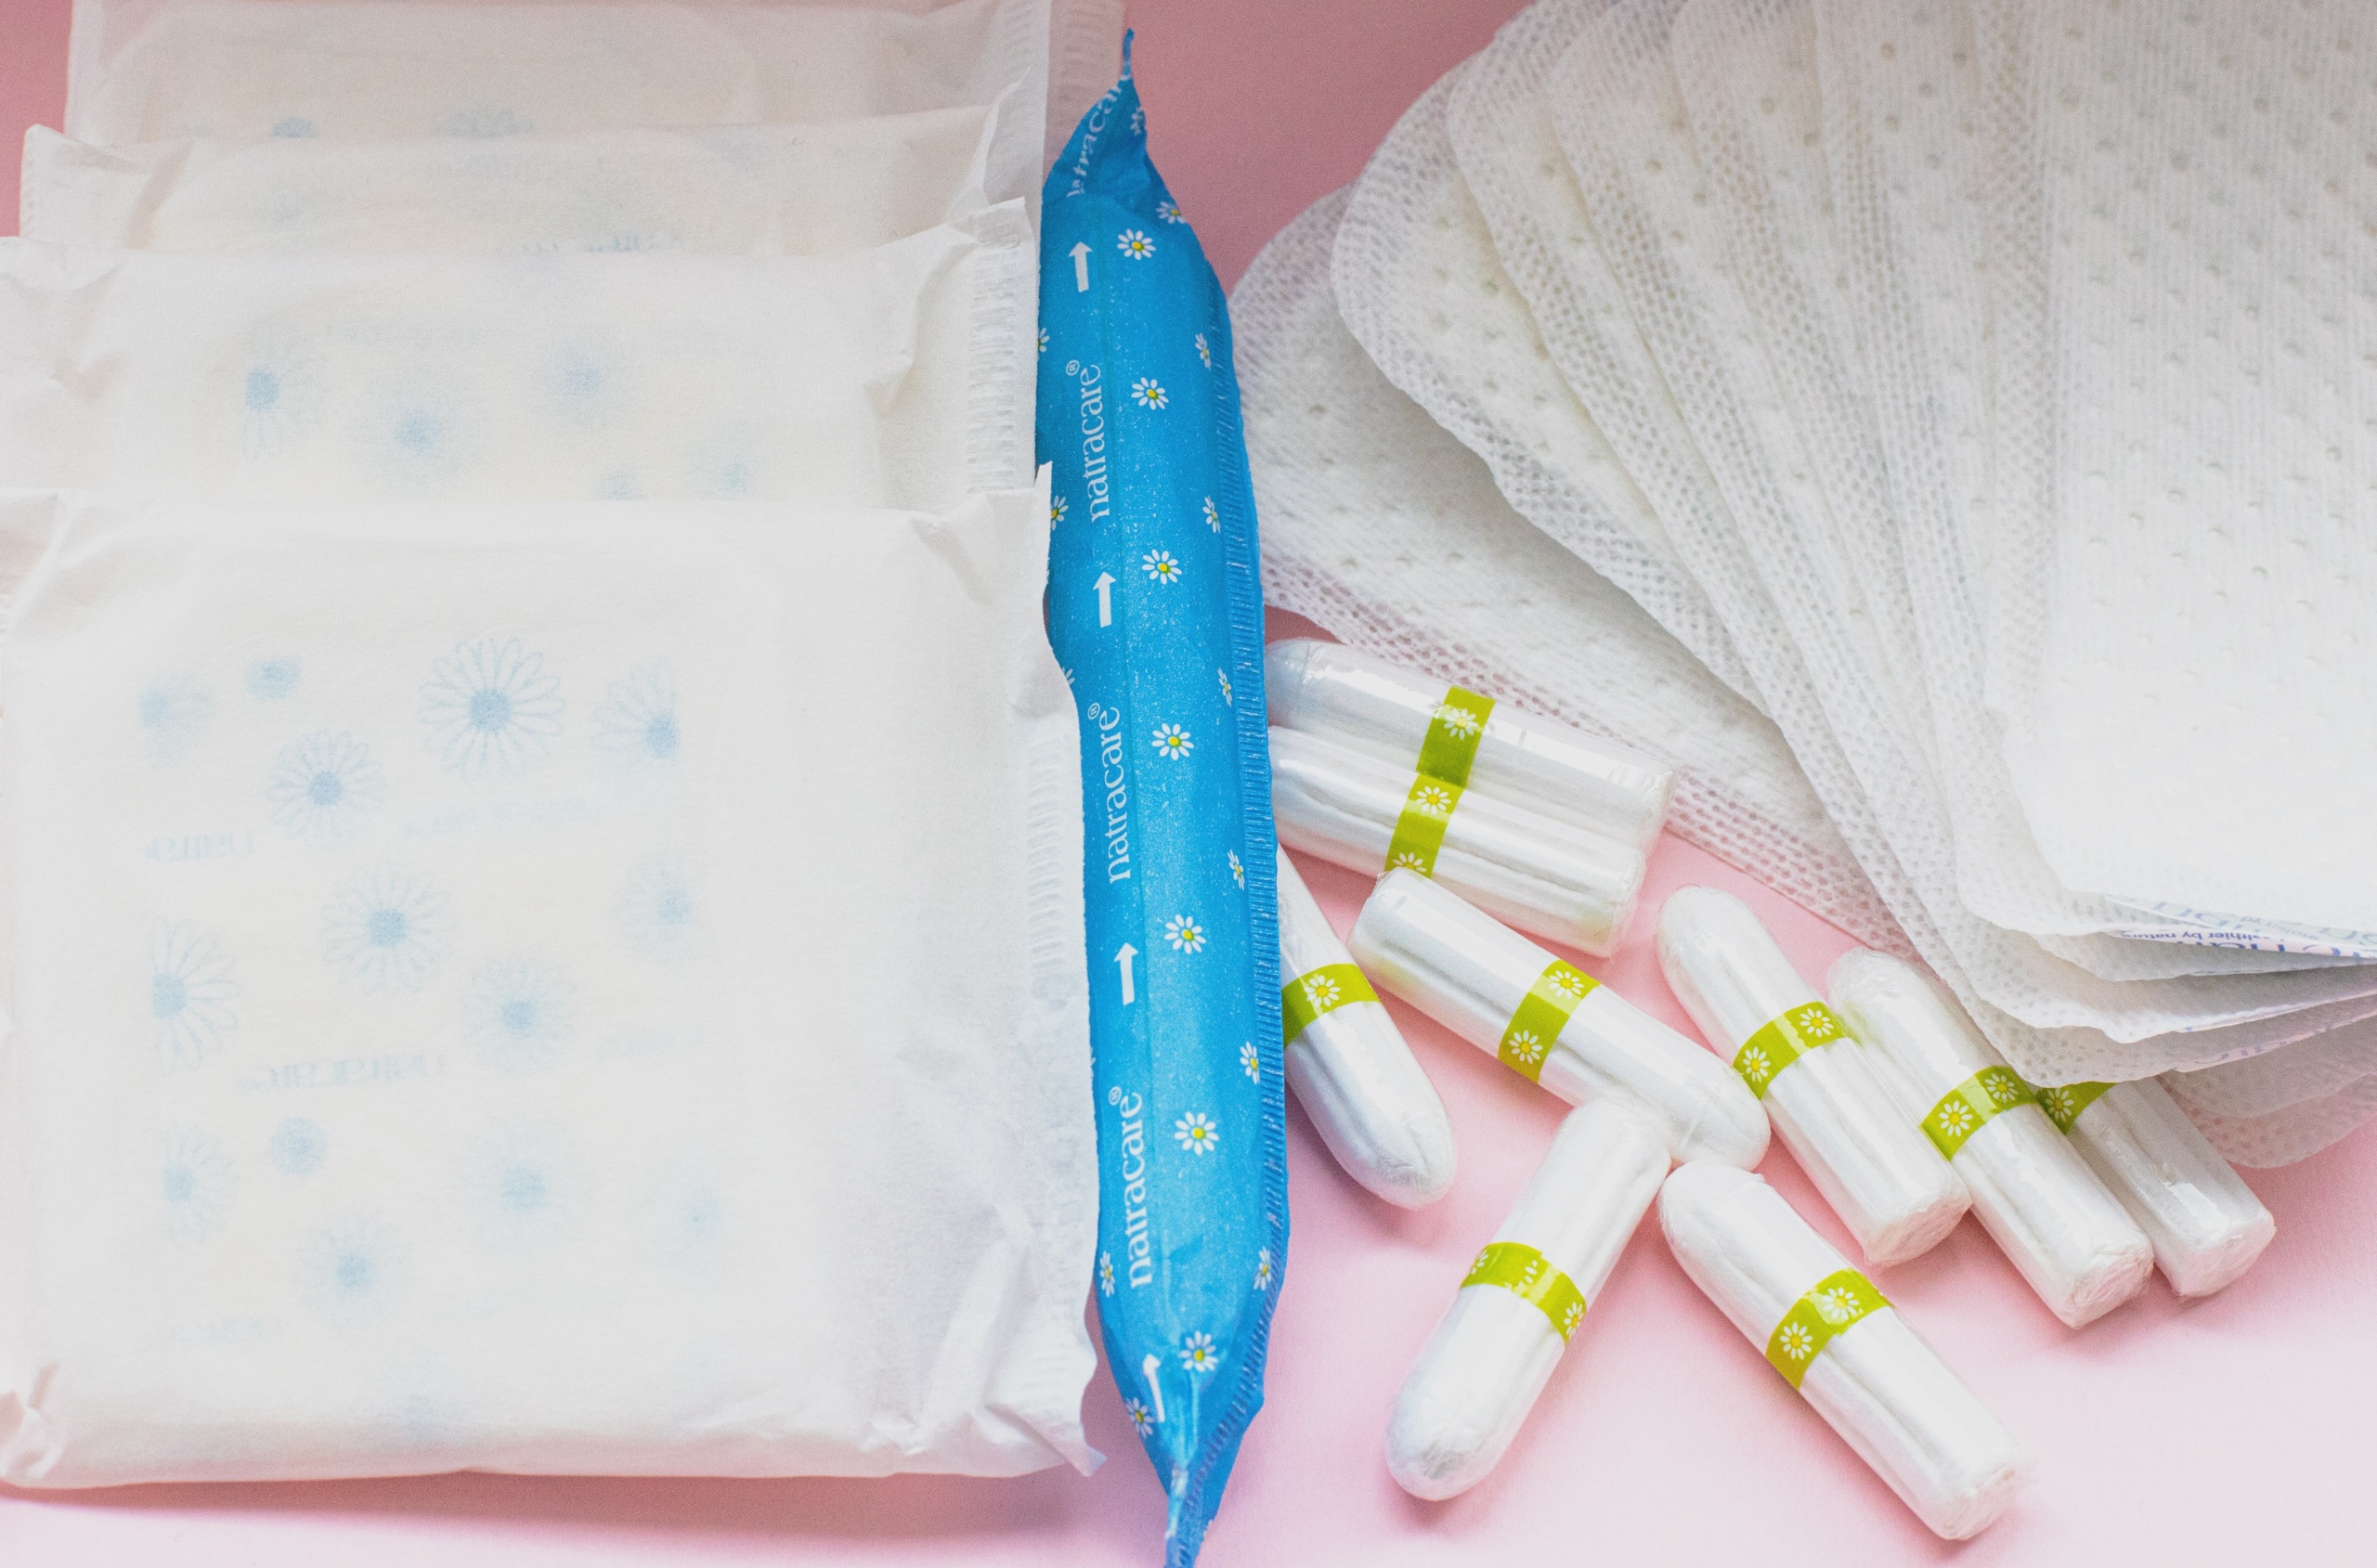 Pads and tampons